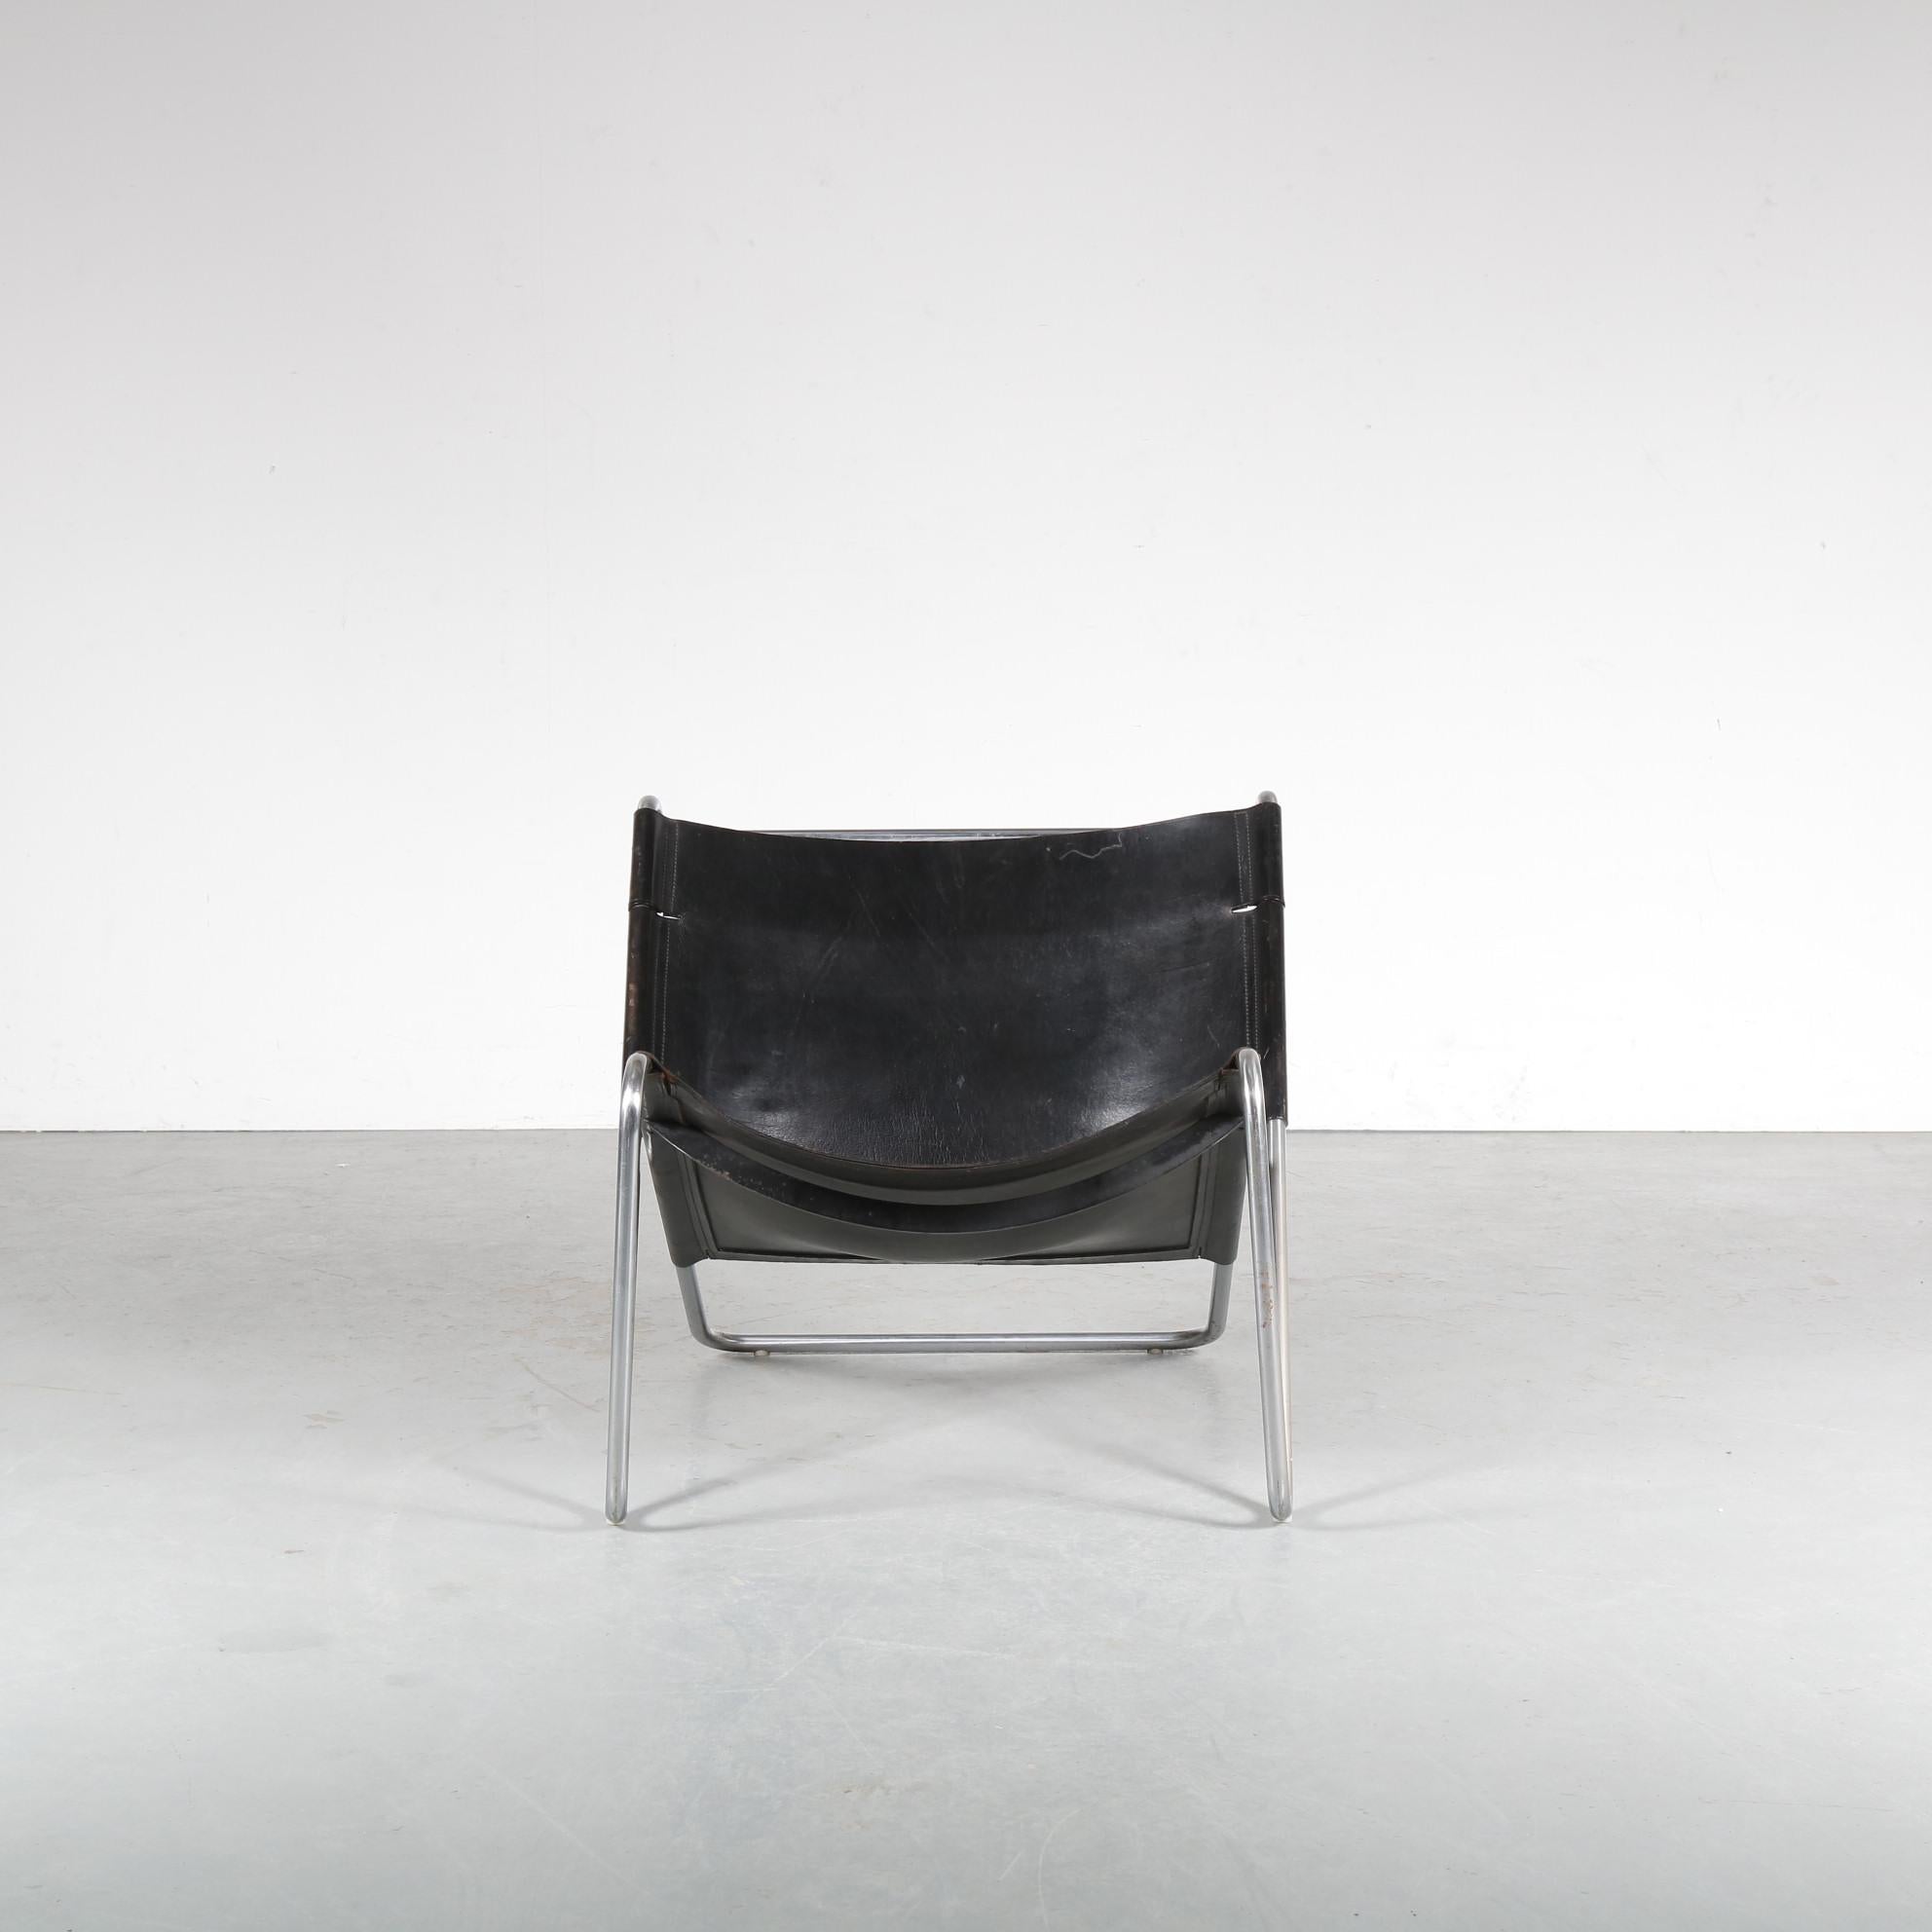 An impressive lounge chair designed by Kwok Hoi Chan, manufactured by Spectrum in the Netherlands around 1970.

The piece has a tubular, chrome plated metal frame that holds the black neck leather upholstery. This thick quality leather provides an